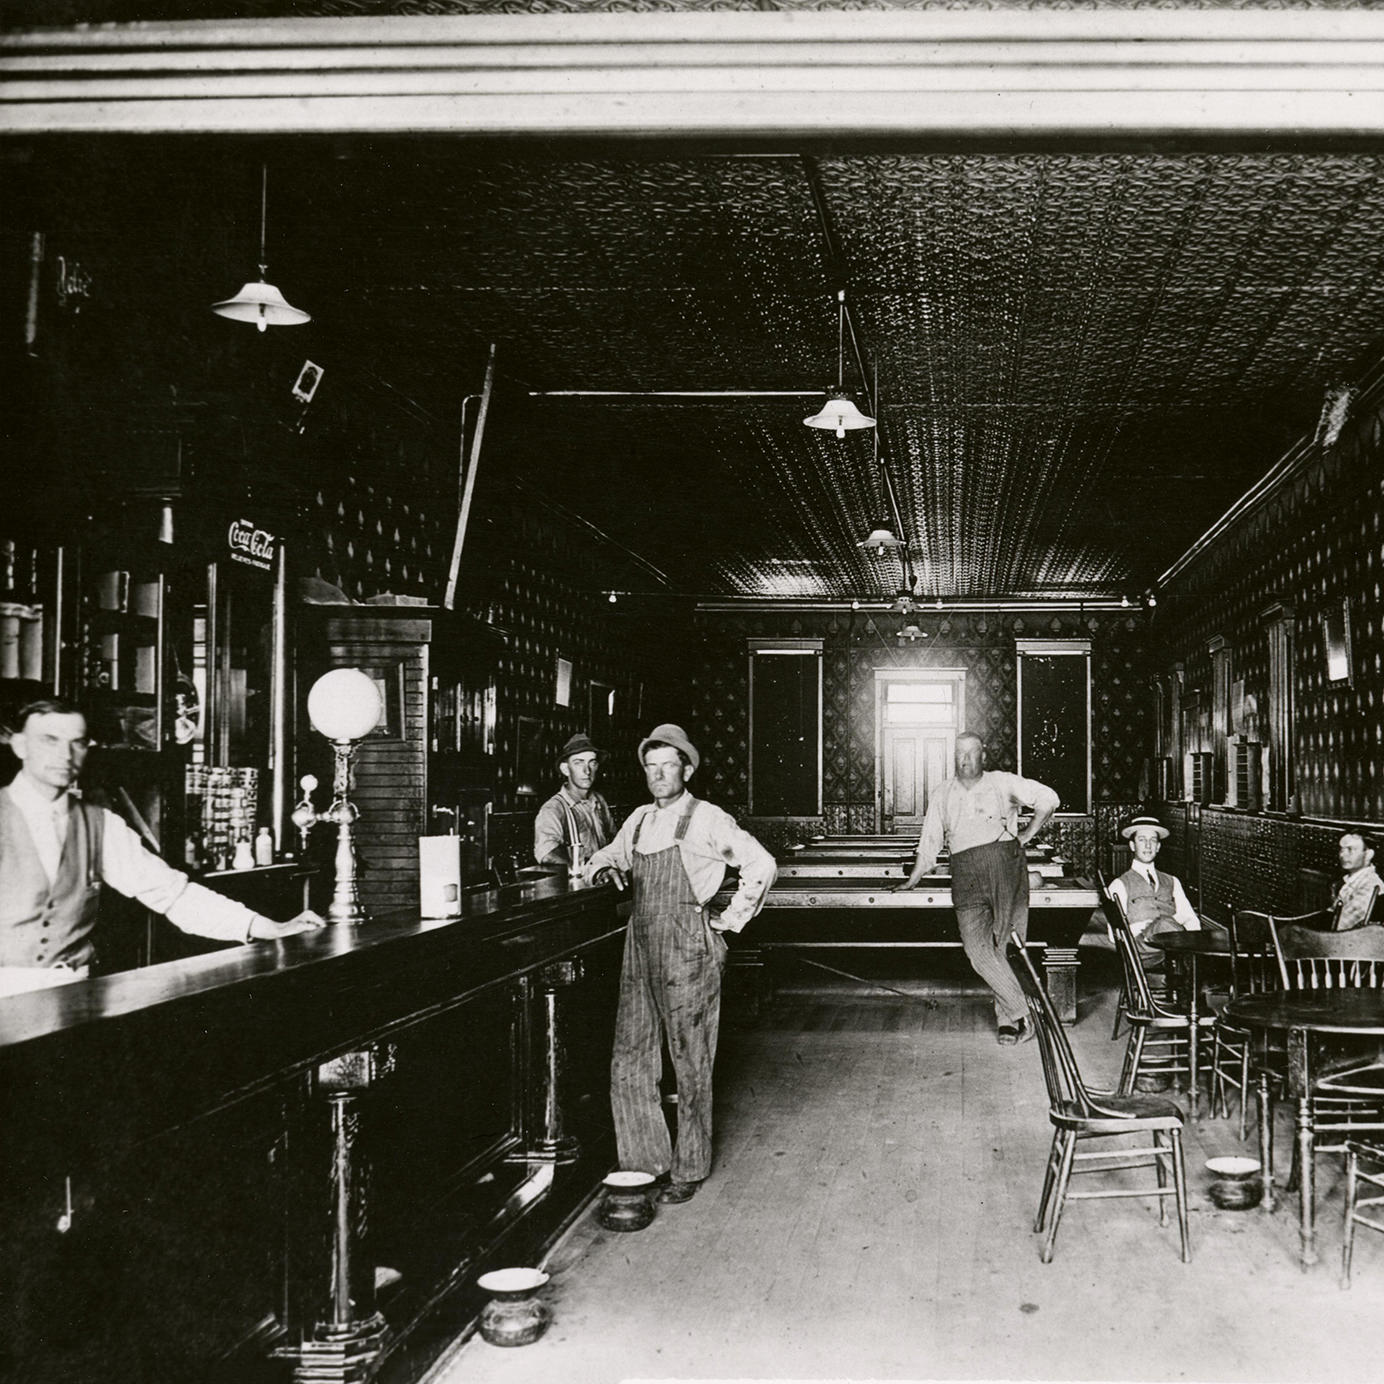 Five-Cent Beers and Hard-Drinking Horses: 15 Saloon Photos Reveal the Real Wild West